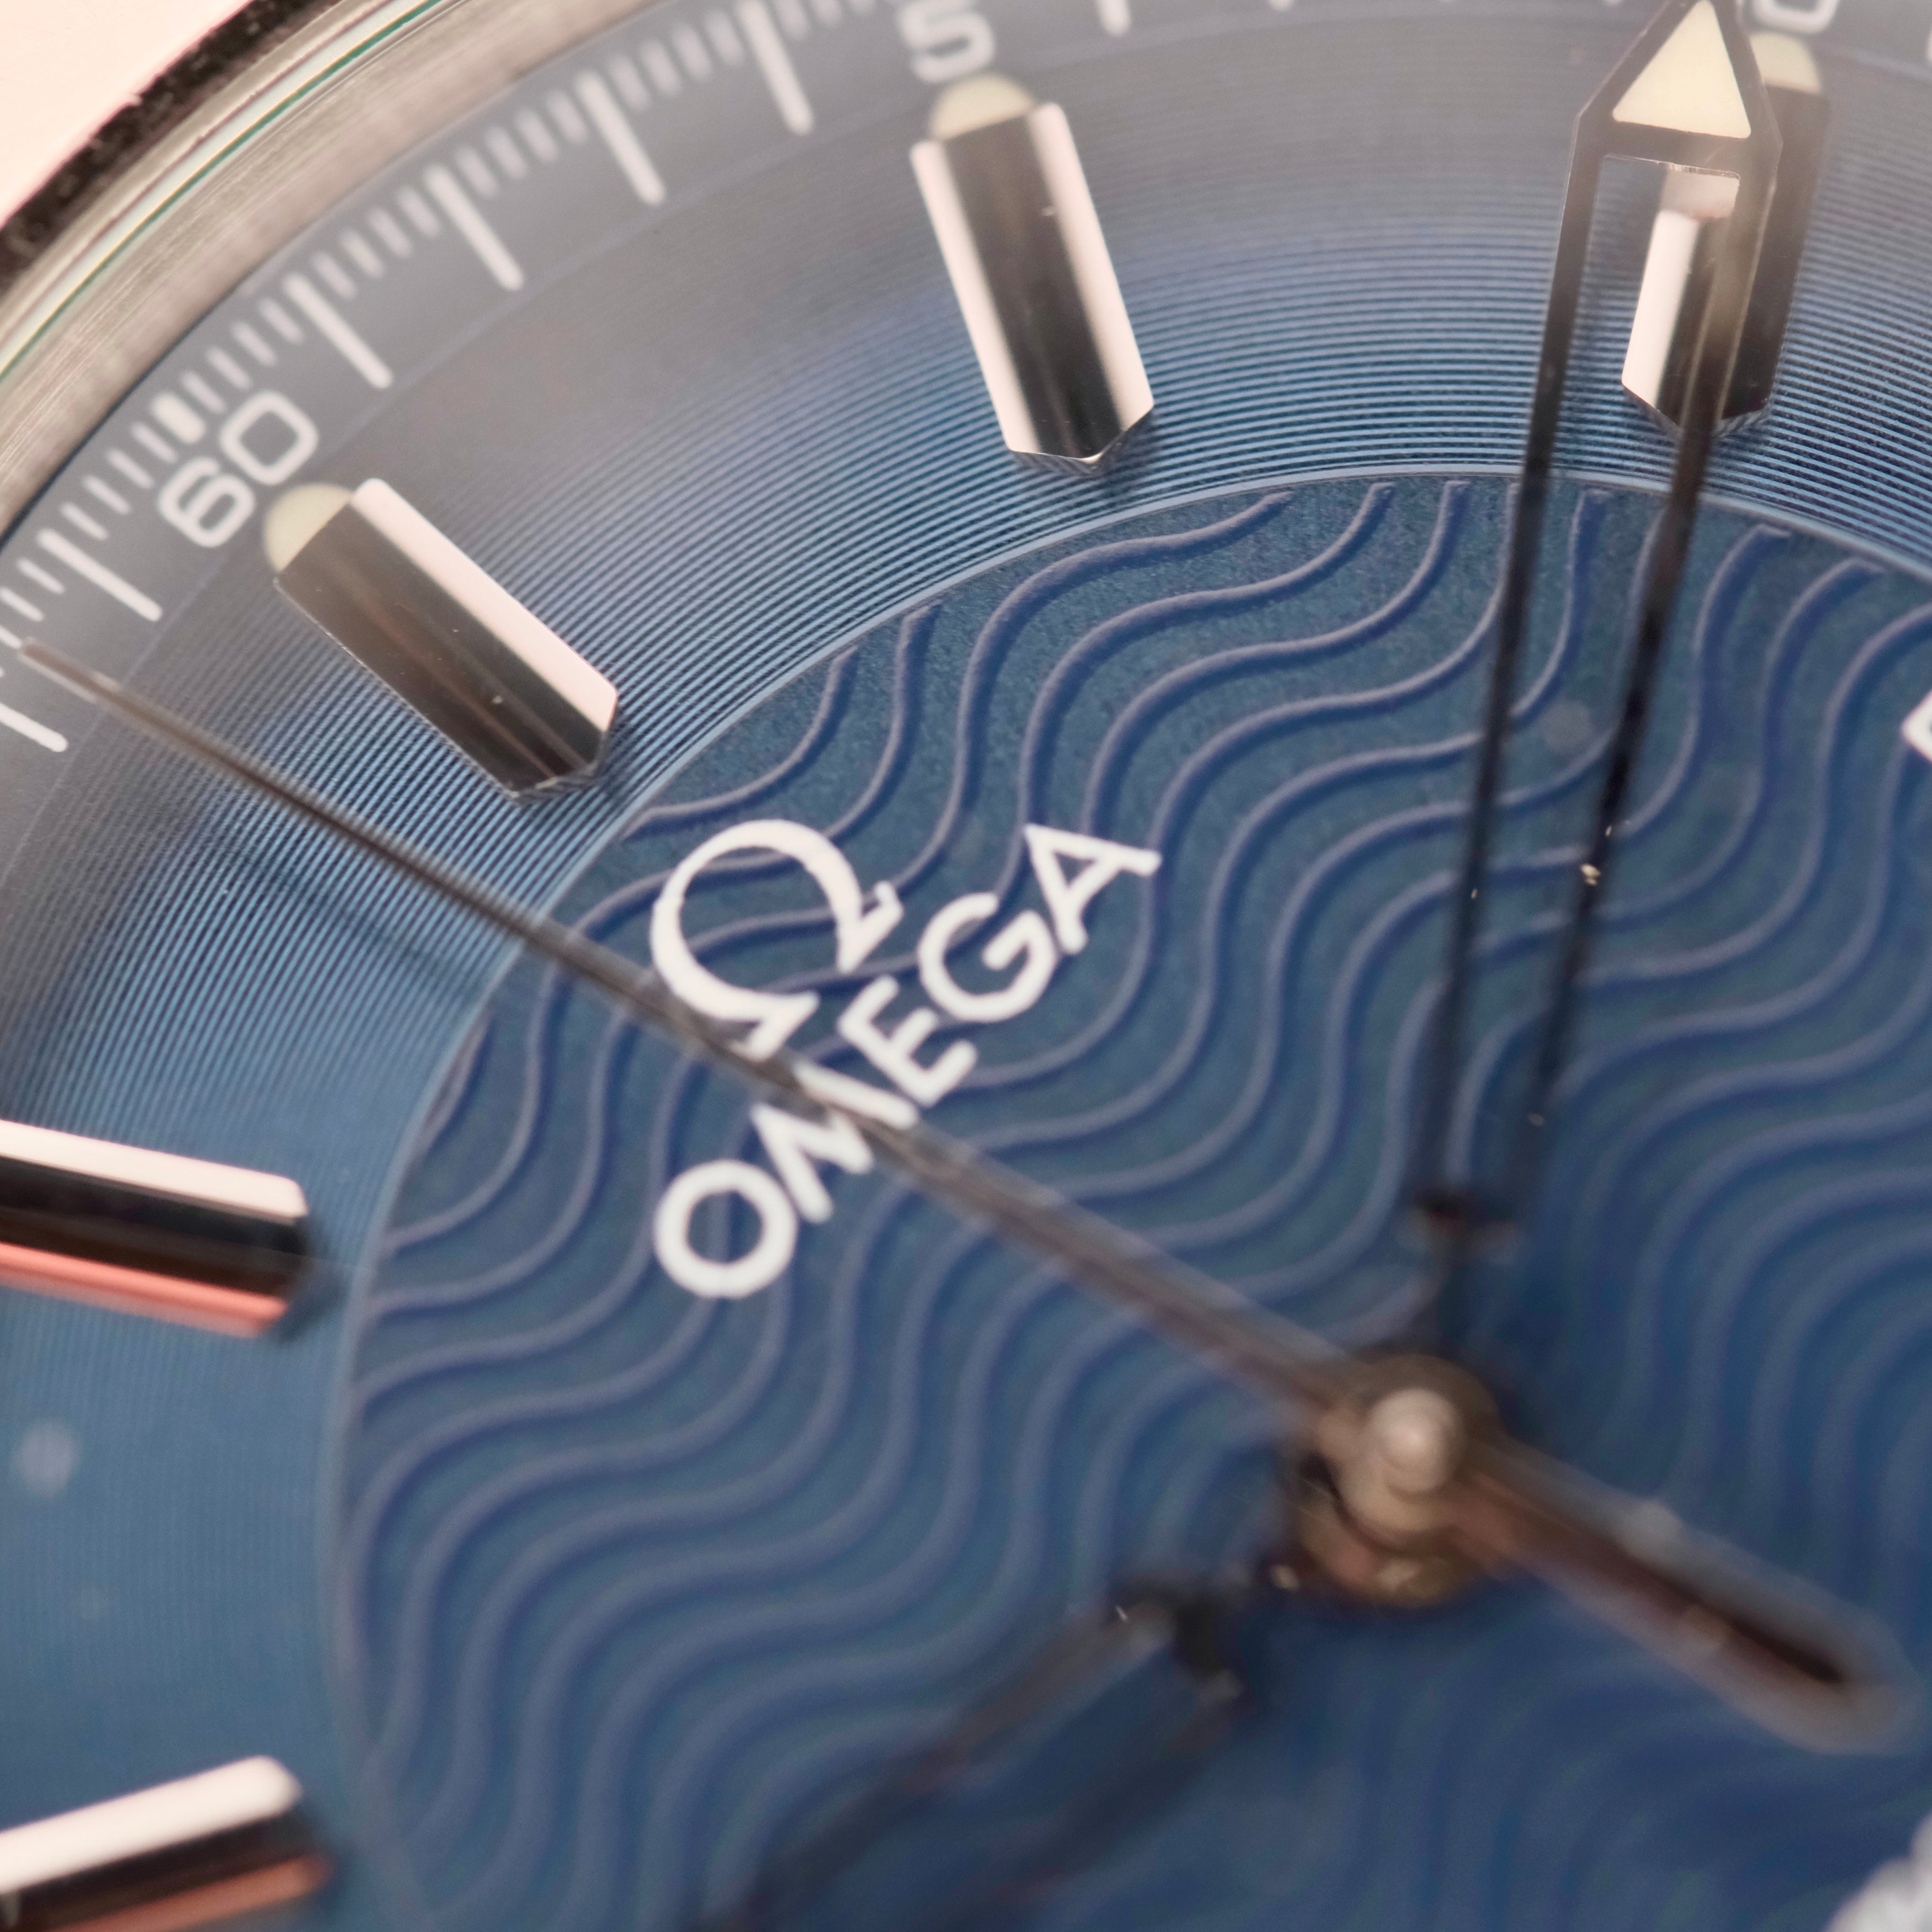 The 5 Best Omega Watches Compared: Find Your Perfect Match